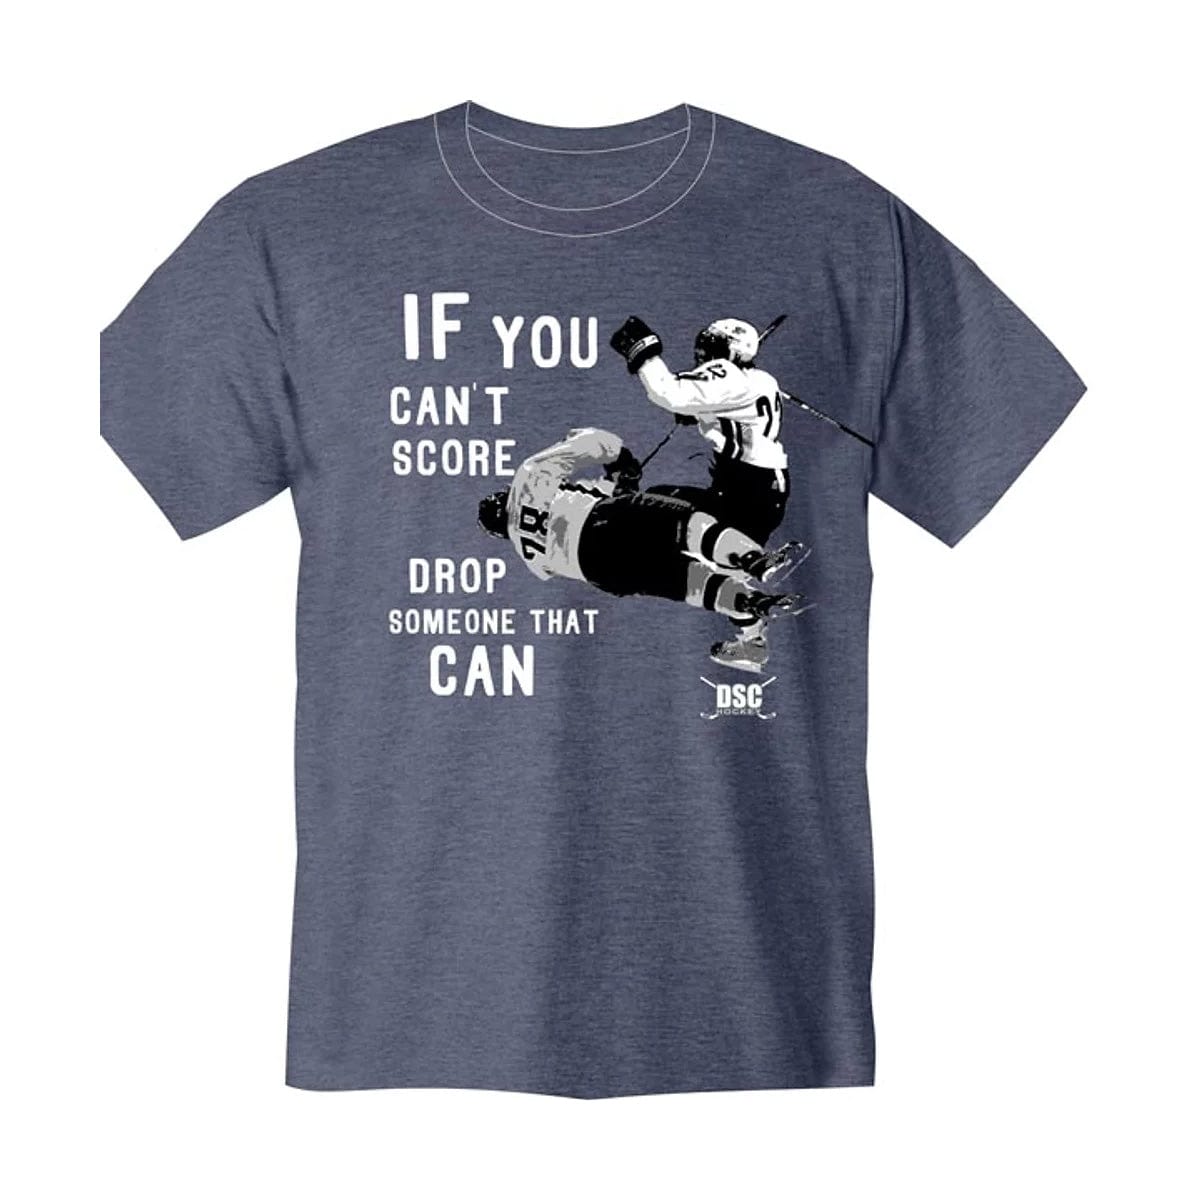 DSC Hockey Can't Score Youth Shirt - The Hockey Shop Source For Sports